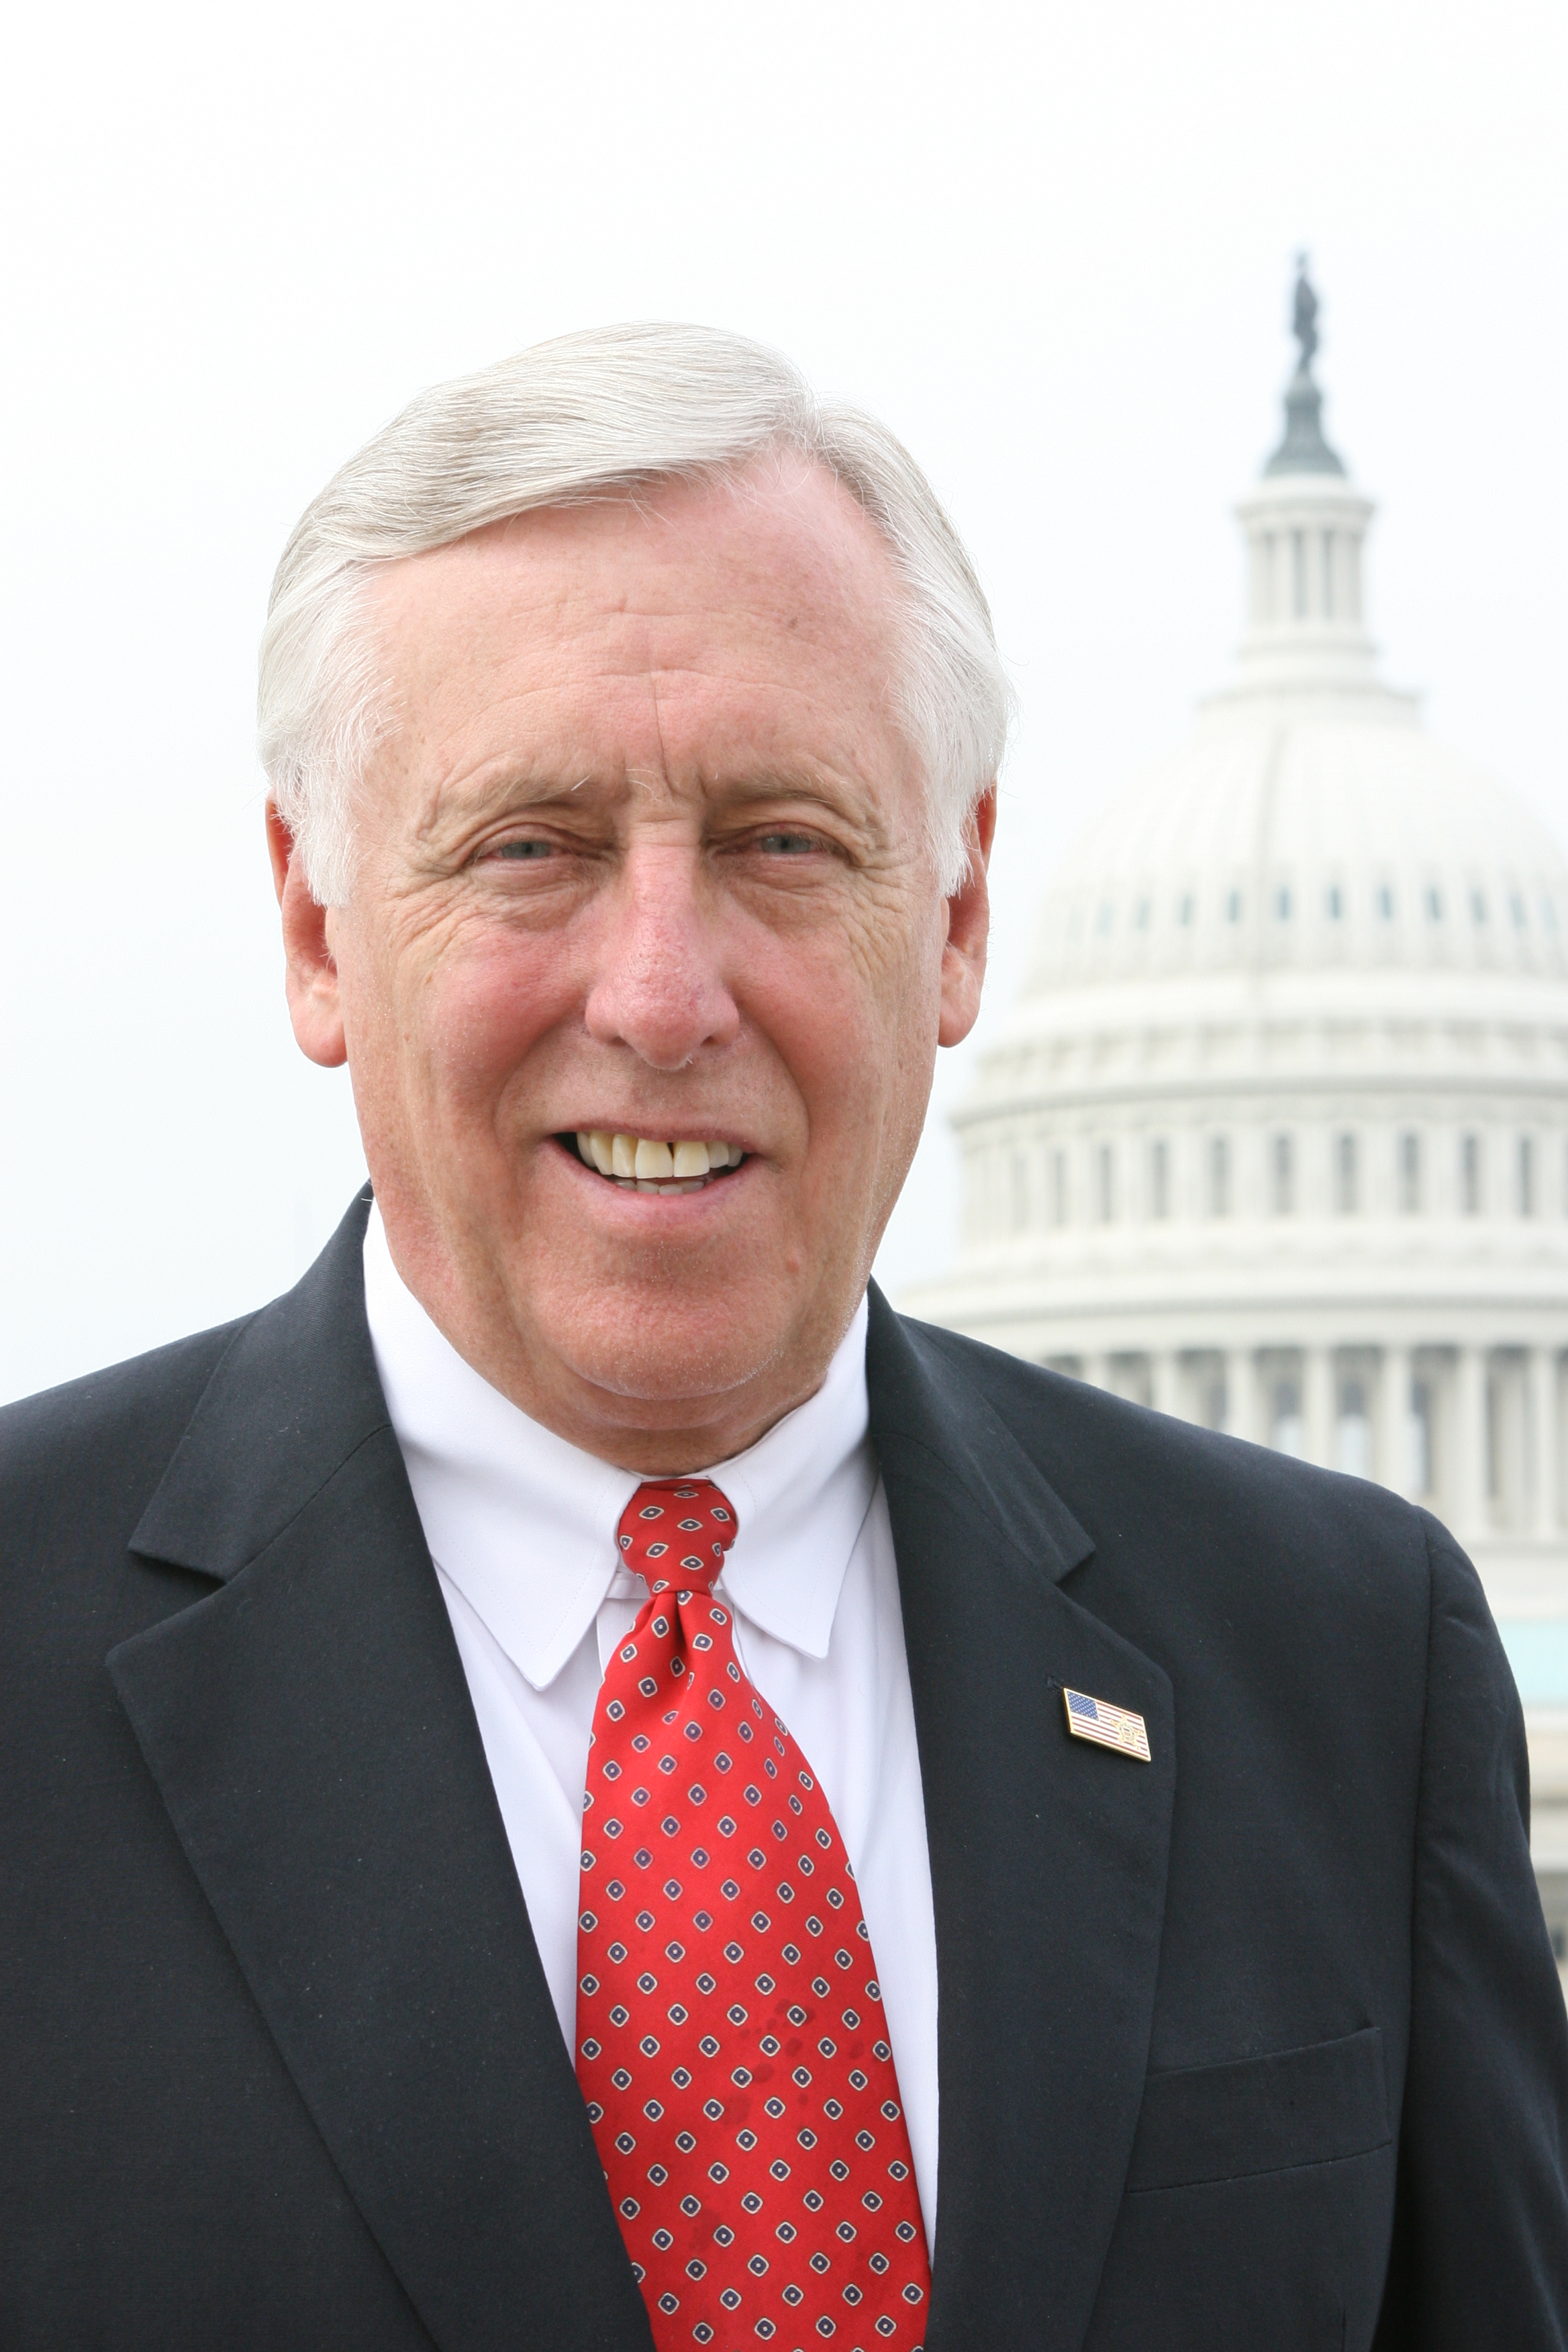 Photo of Steny Hoyer in front of the Capitol building